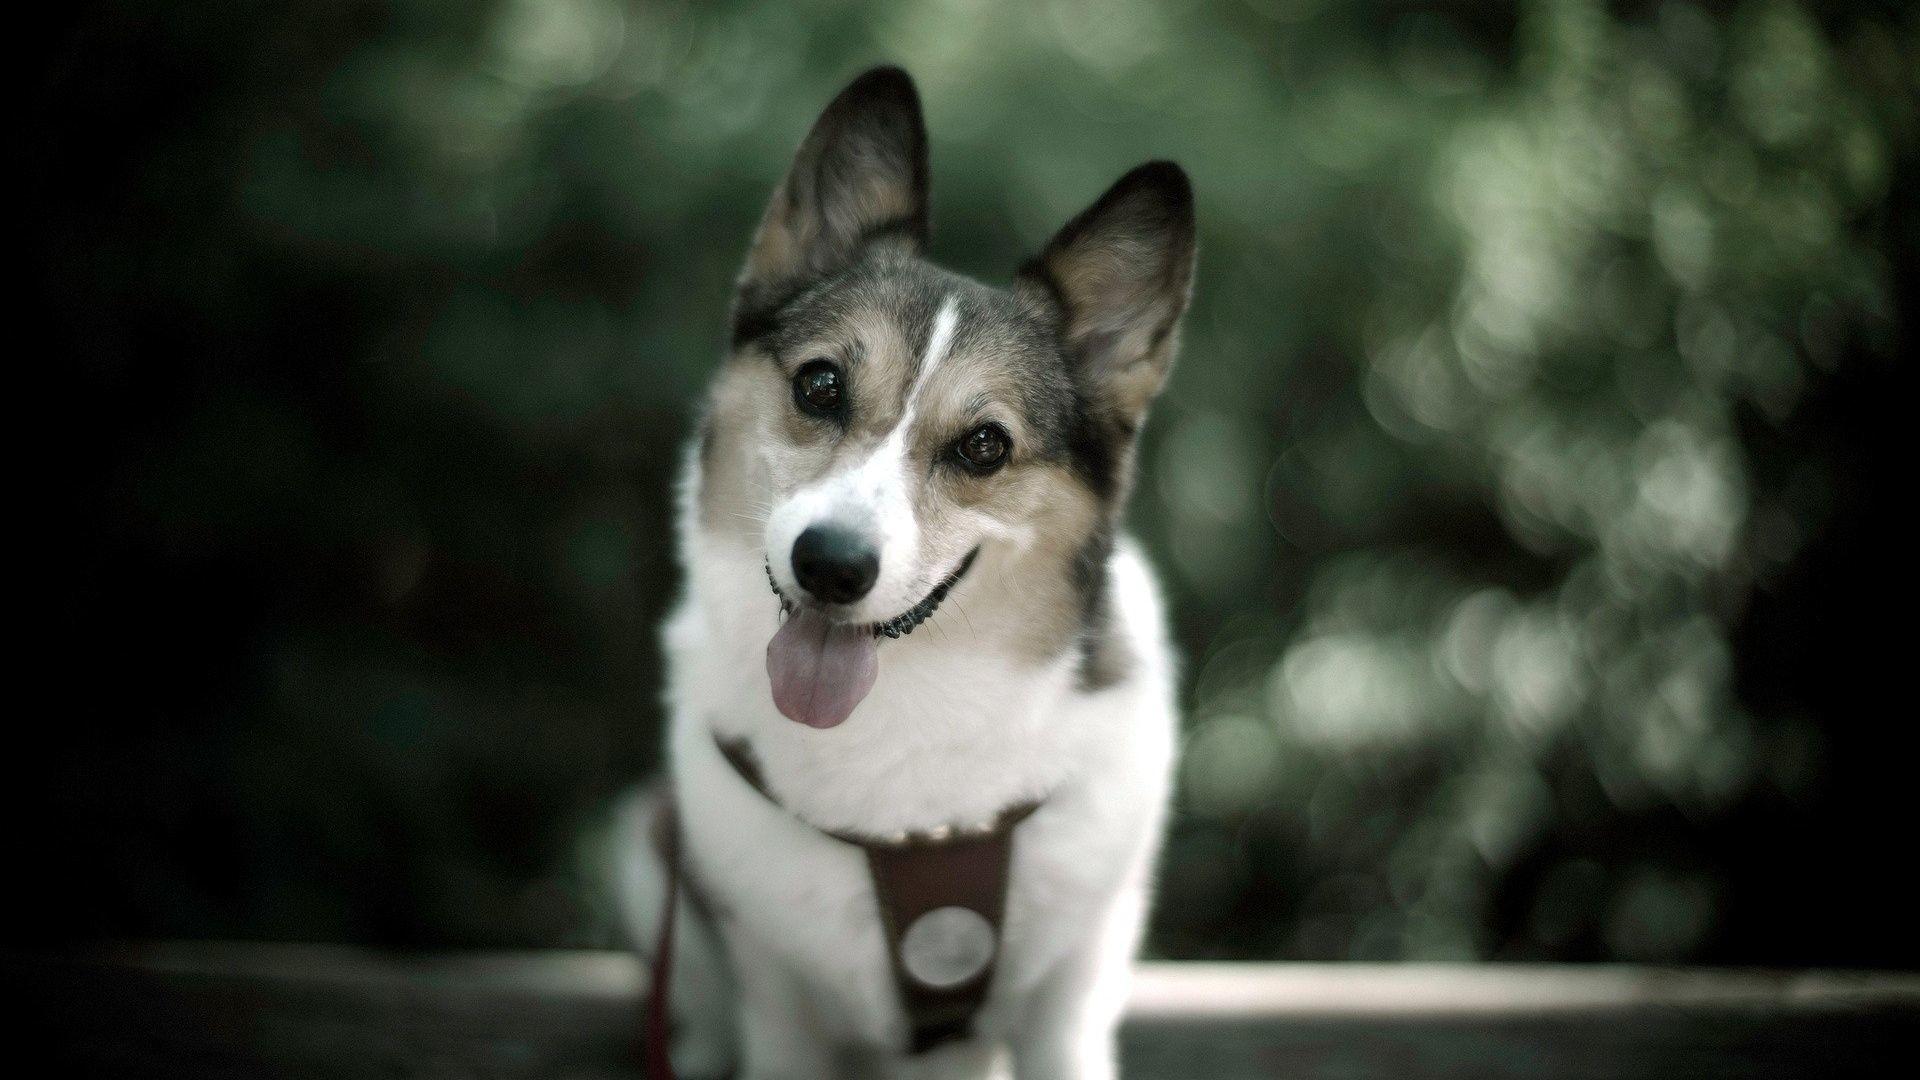 1920x1080 Animal Wallpaper: Cute Dog Wallpaper with High Resolution.